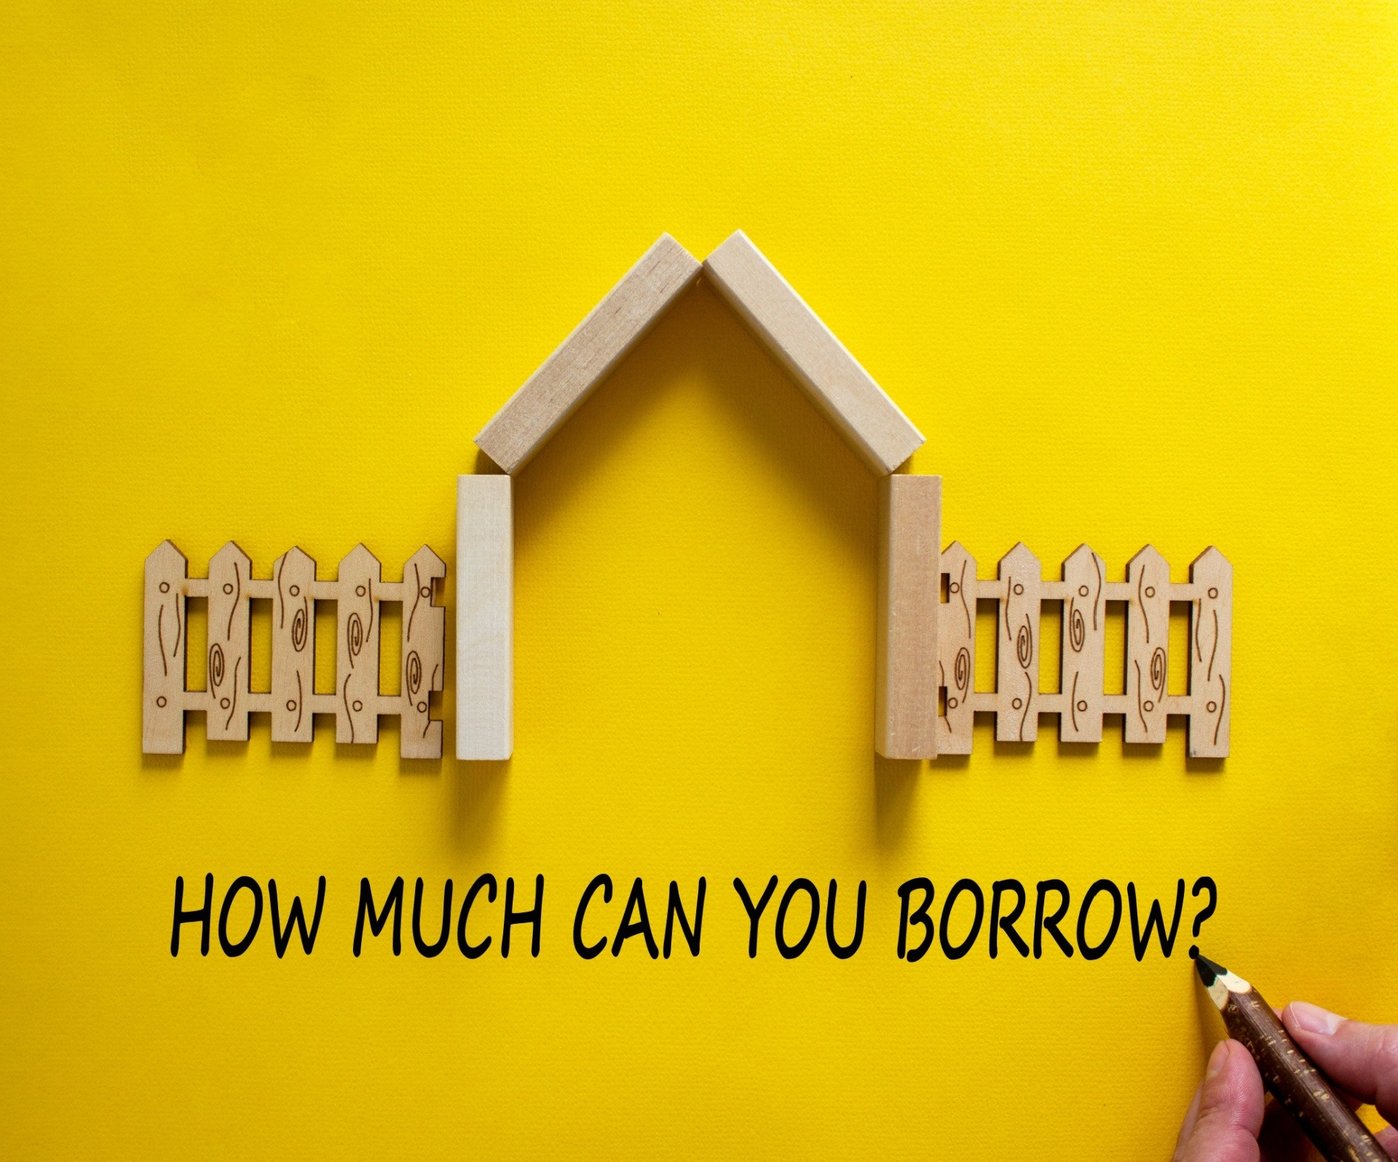 How much can you borrow with a bridging loan in the uk?